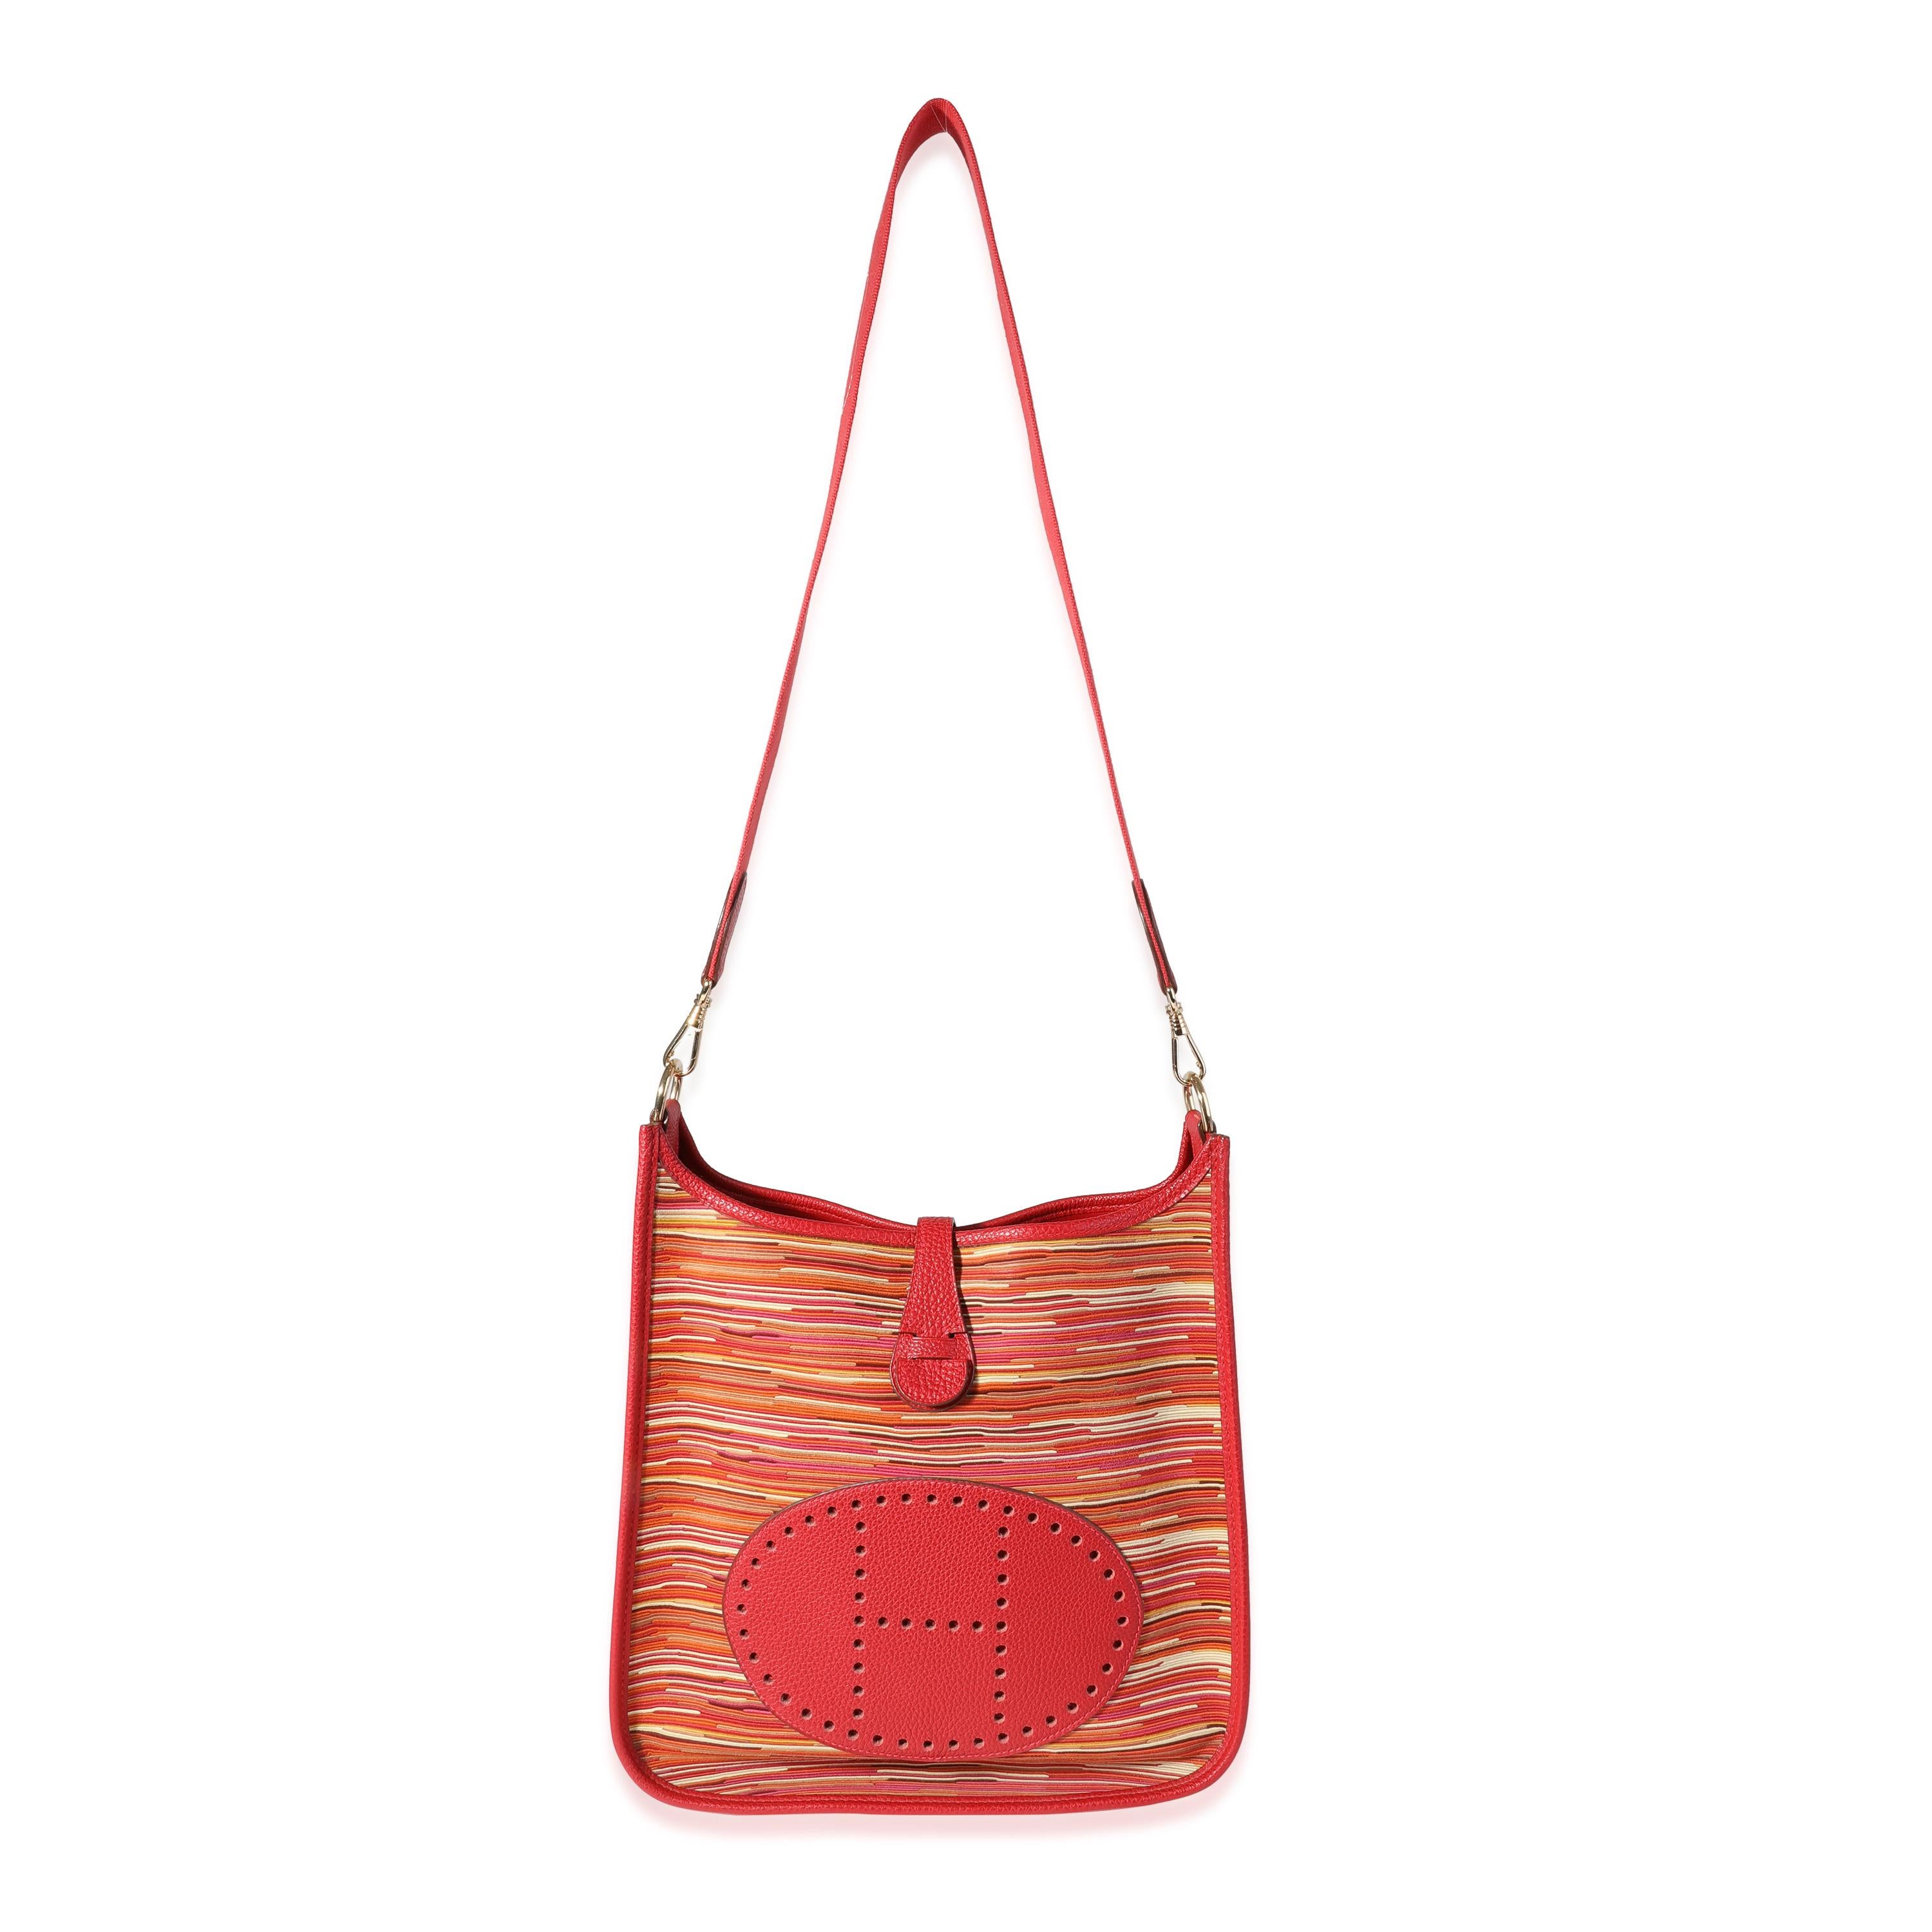 Listing Title: Hermès Rouge Casaque Togo & Vibrato Evelyne I 29 GHW
SKU: 120534
Condition: Pre-owned (3000)
Handbag Condition: Excellent
Condition Comments: Excellent Condition. Light scuffing throughout. No other visible signs of wear.
Brand: